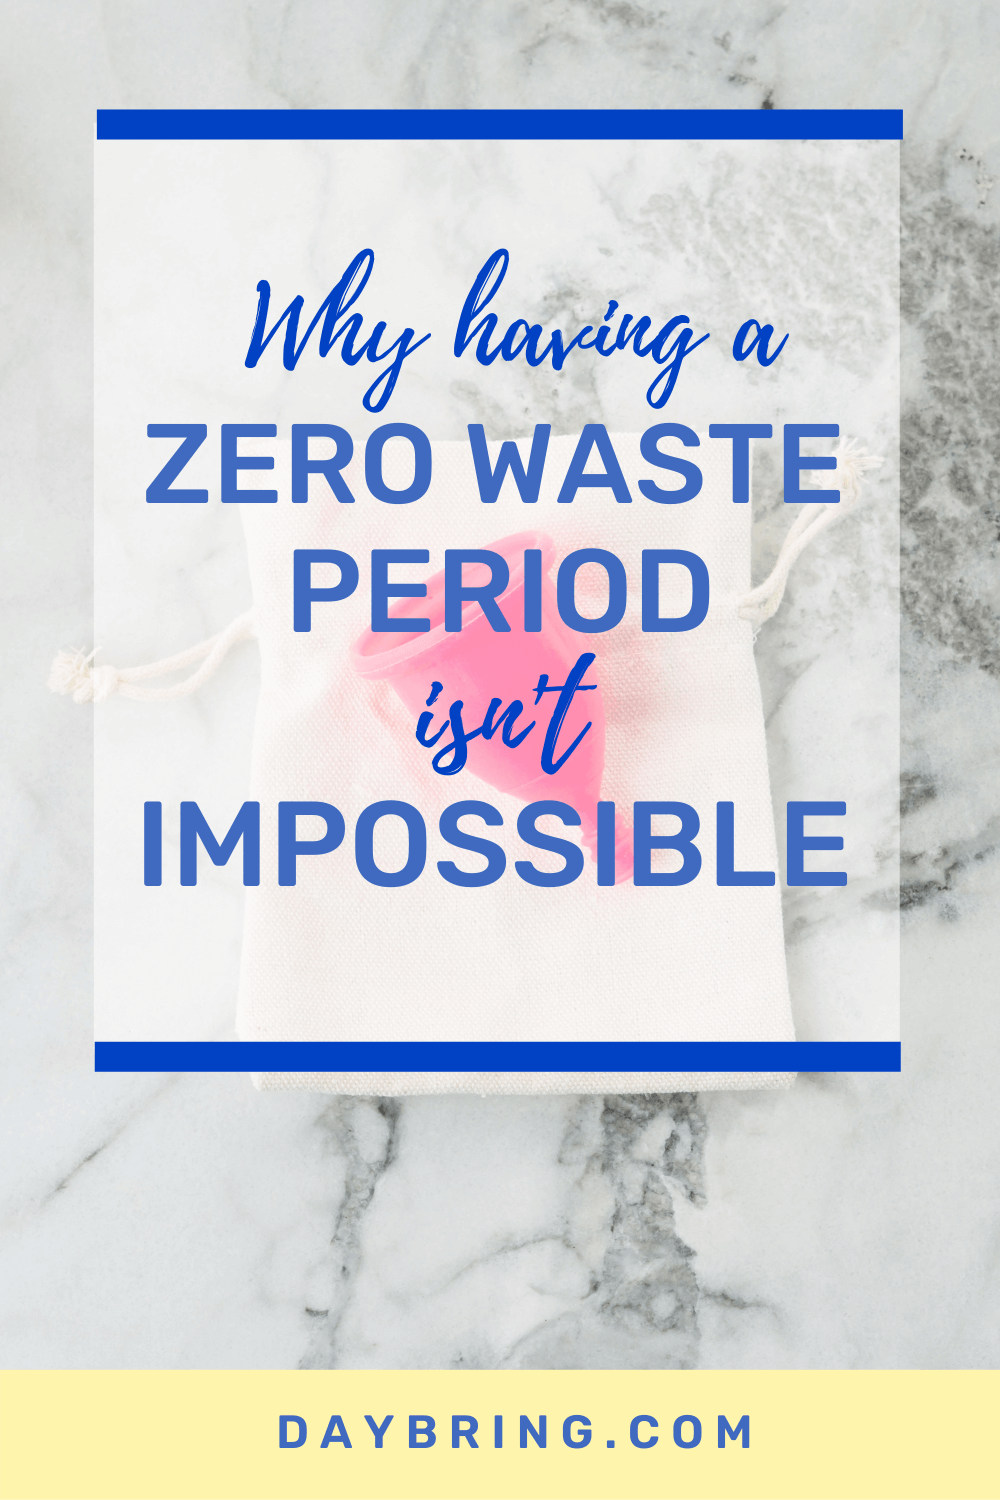 having a zero waste period isn't impossible